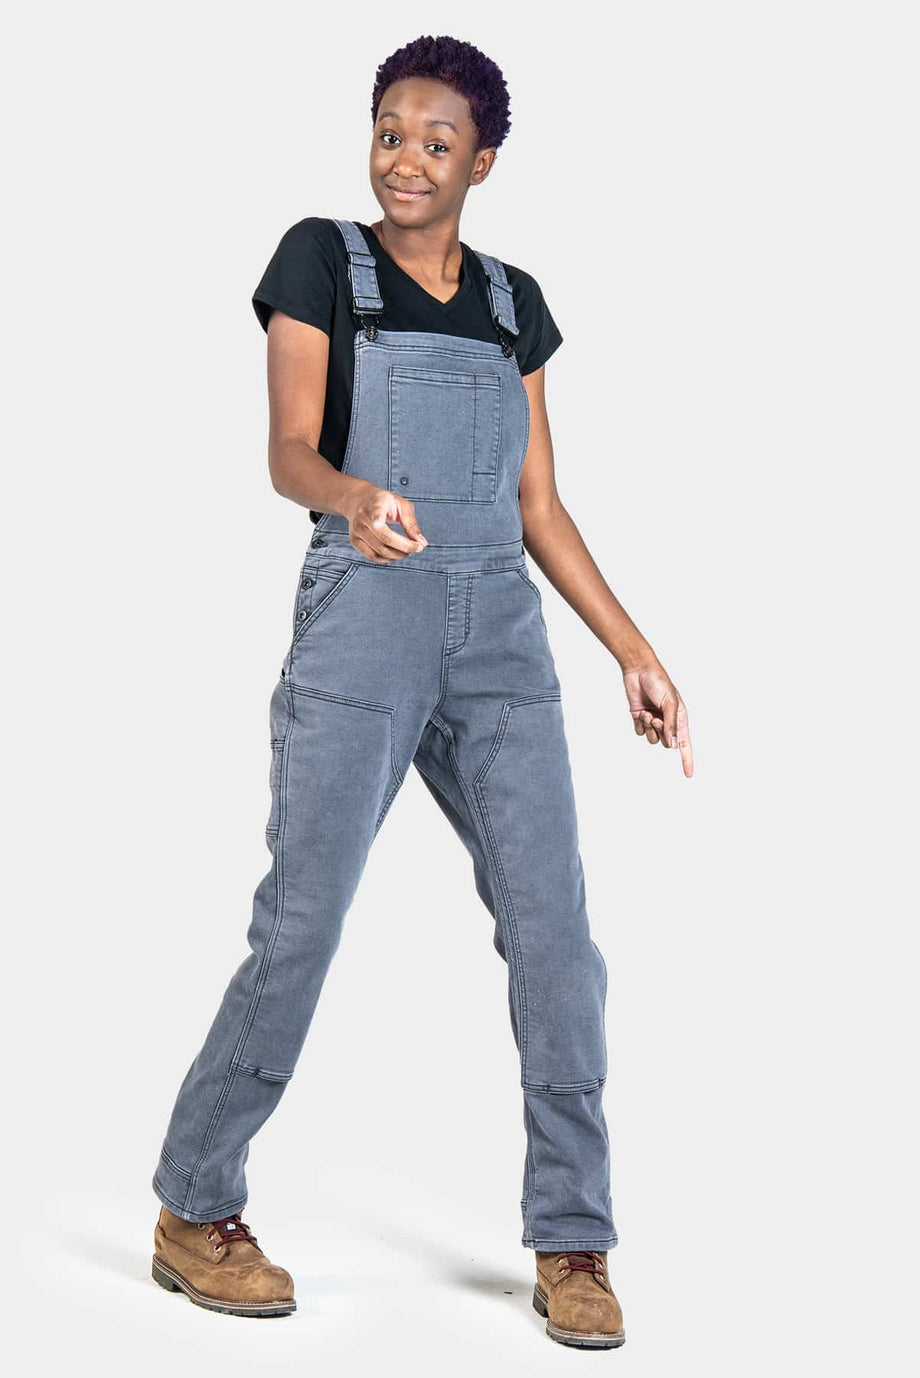 Freshley Overall in Grey Thermal Denim